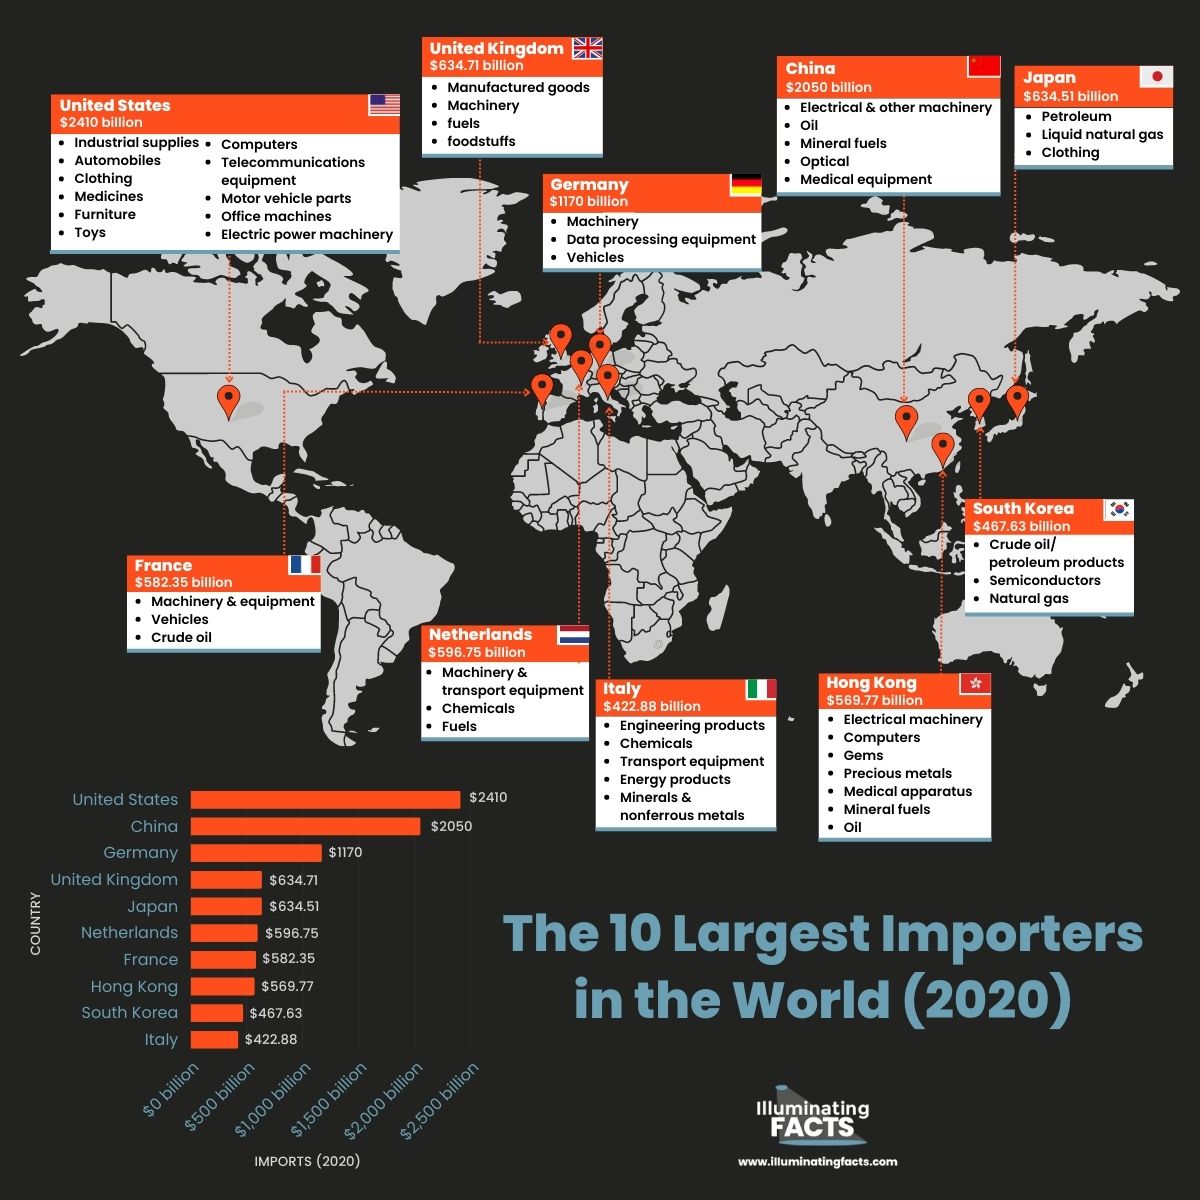 THE 10 LARGEST IMPORTERS IN THE WORLD (2020)